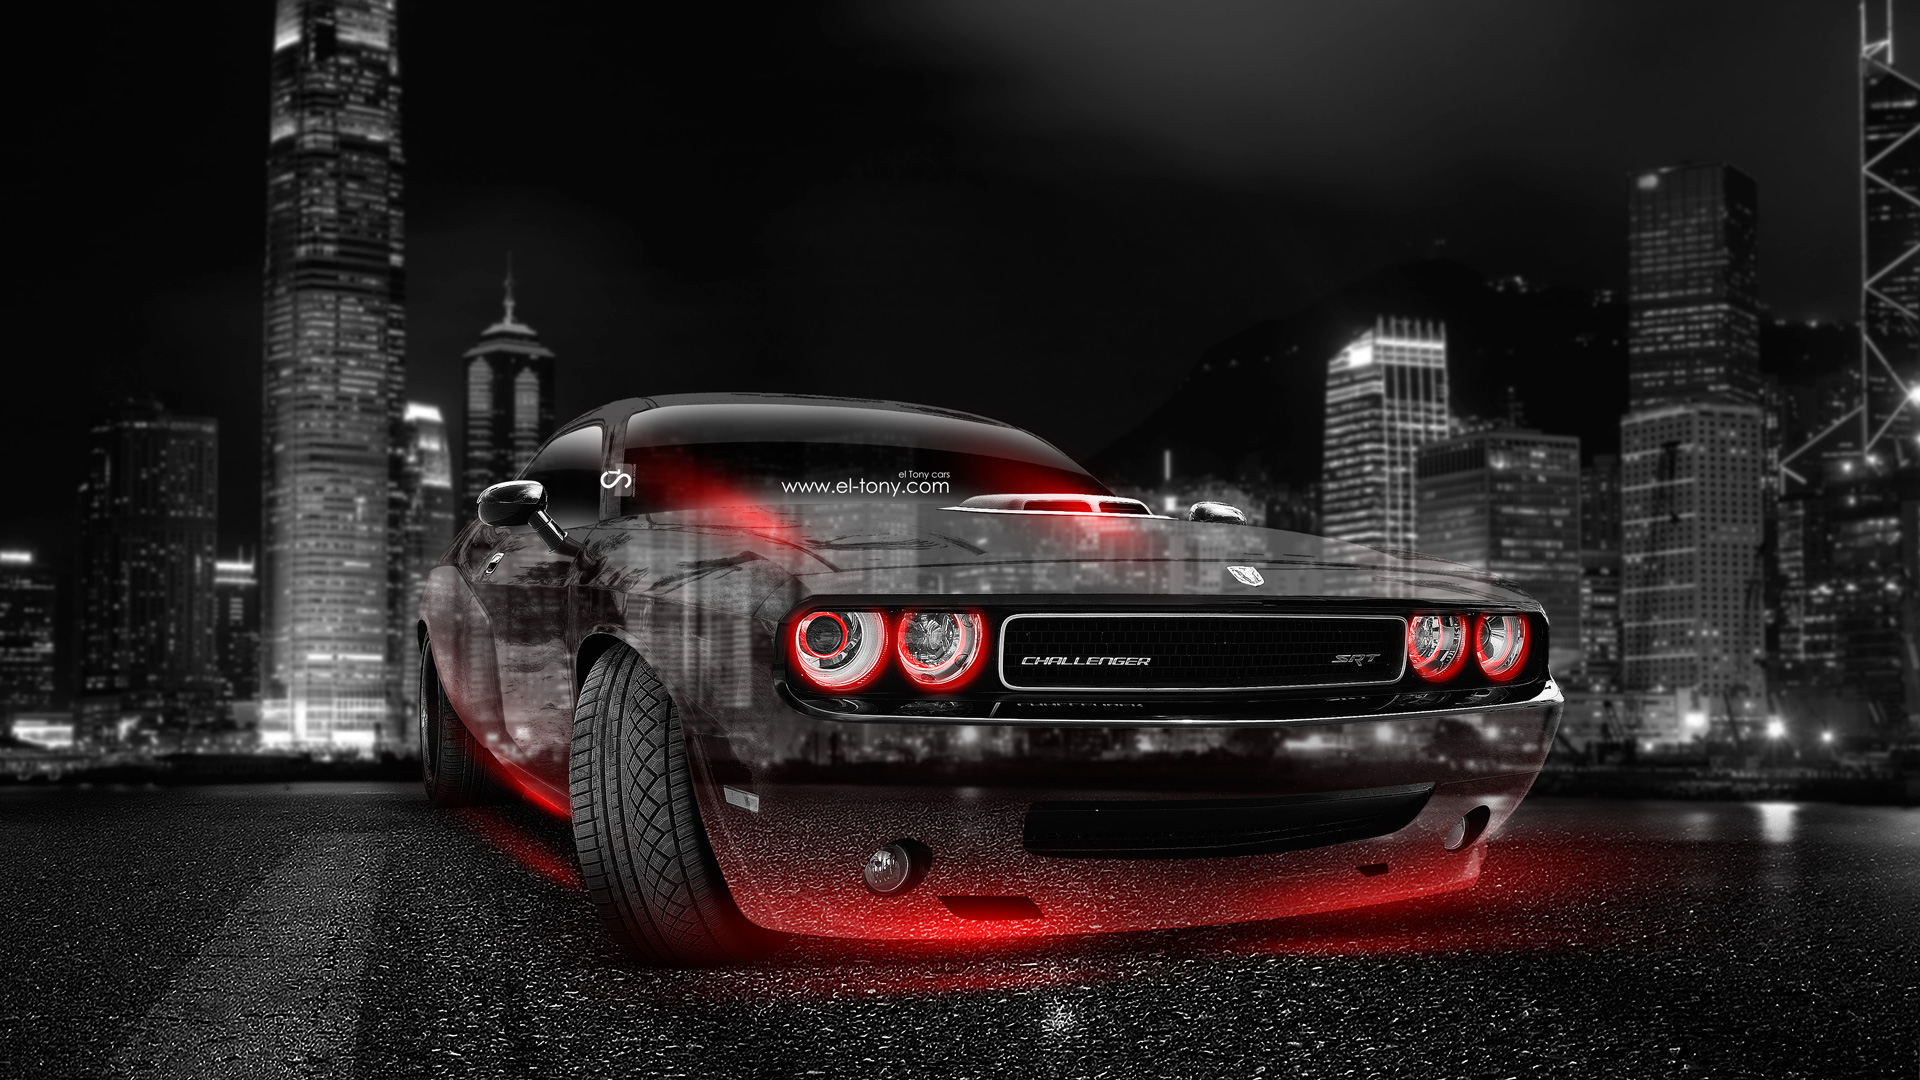  Download Dodge Challenger Wallpaper And Background Image by mquinn61 